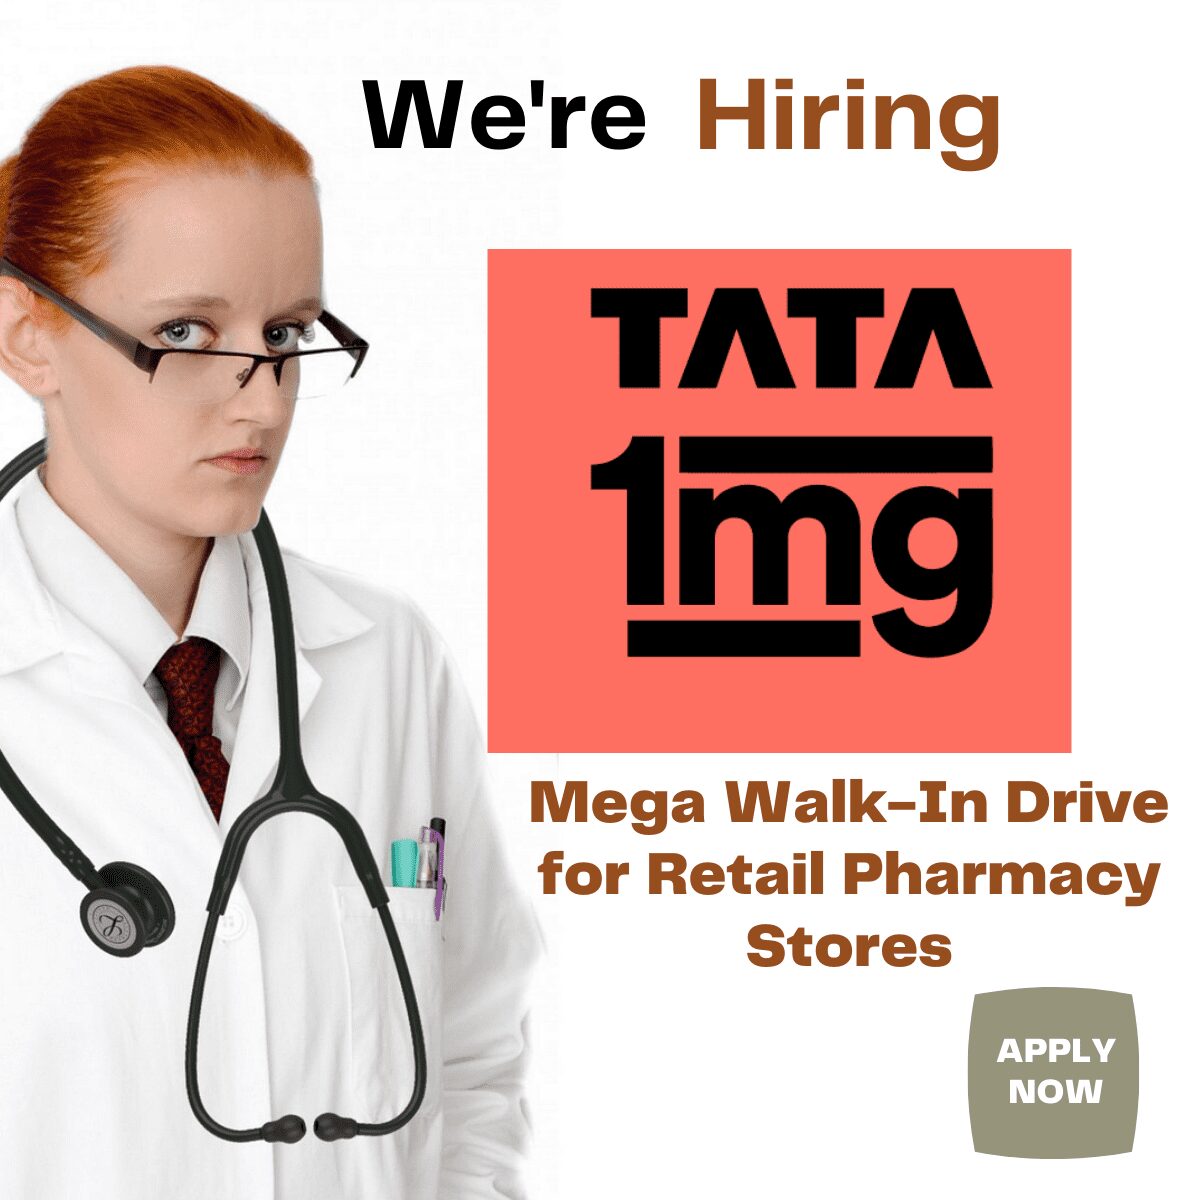 %titl tata 1mg is coming for mega walk in drive for retail pharmacy stores